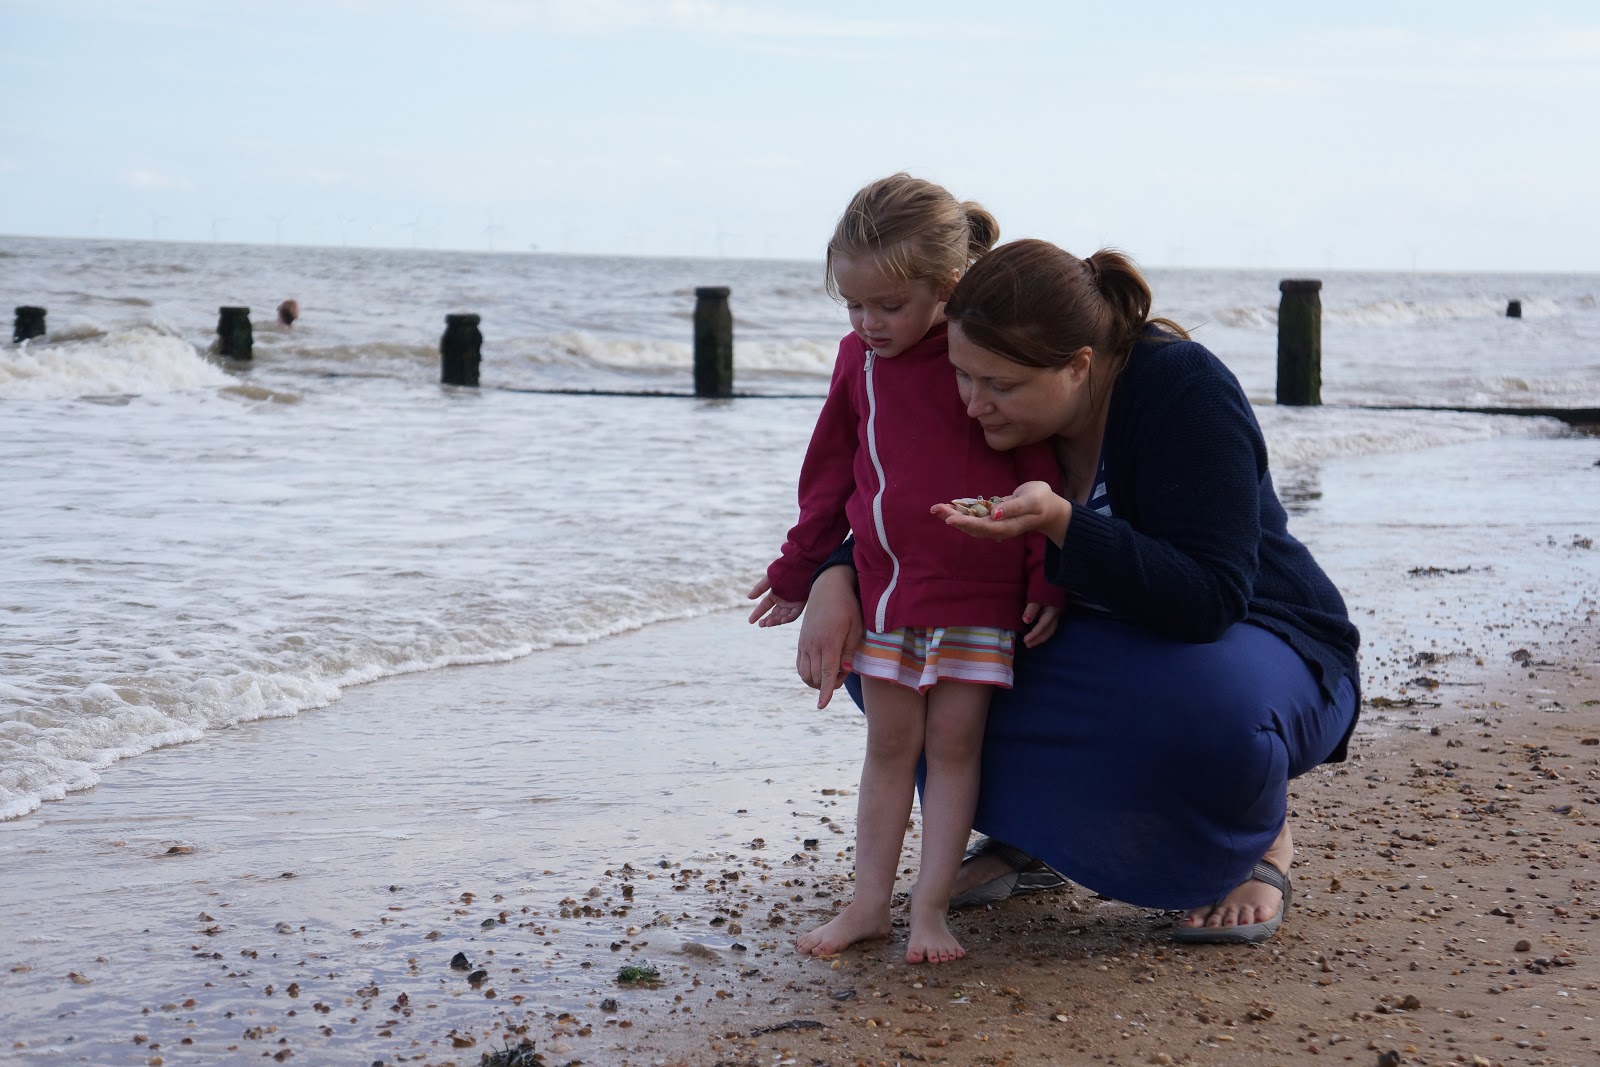 mum collecting seashells with daughter